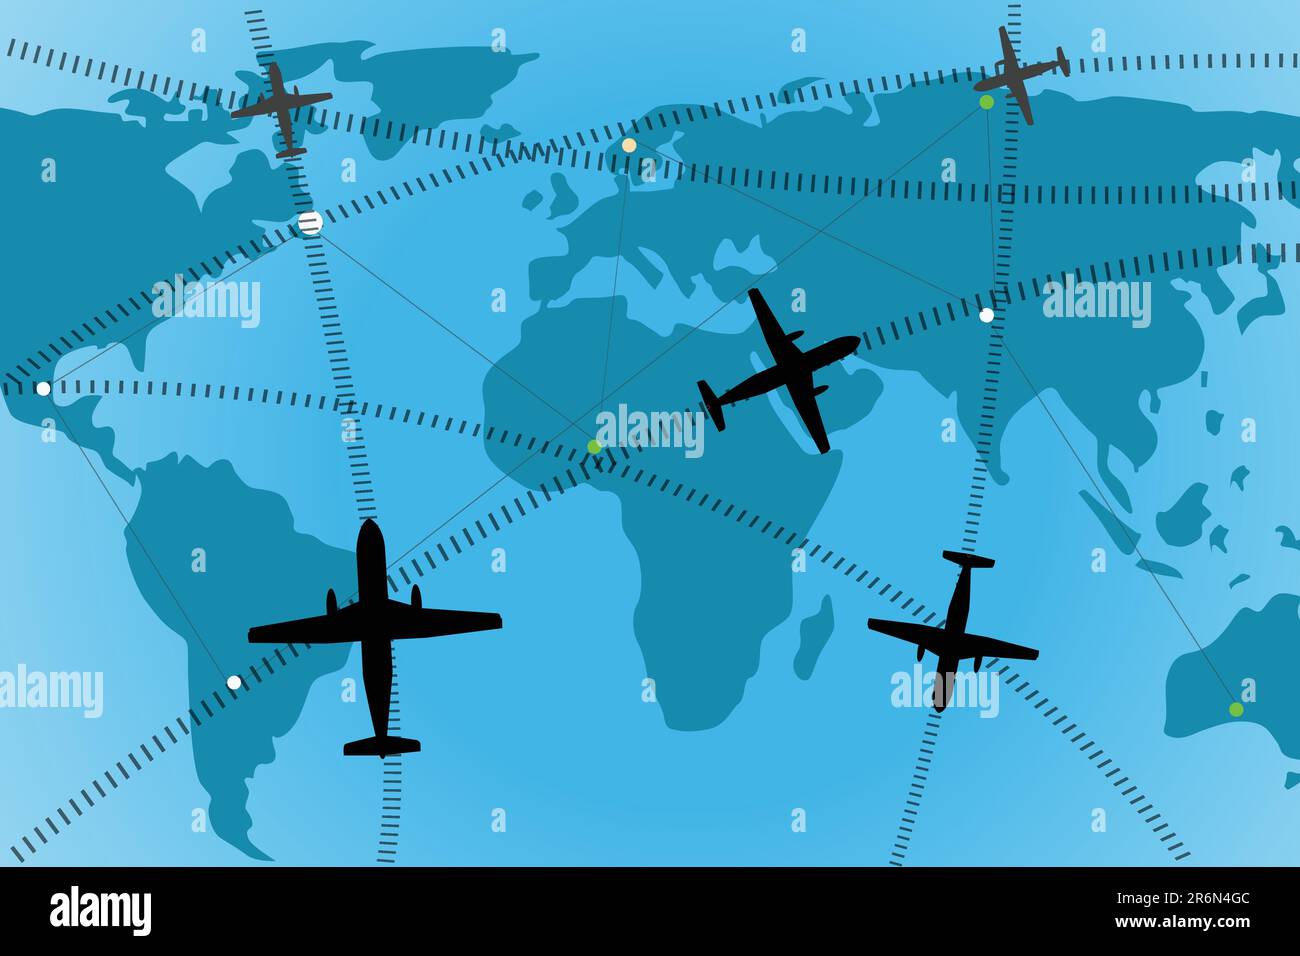 illustration of airline route on world map Stock Vector